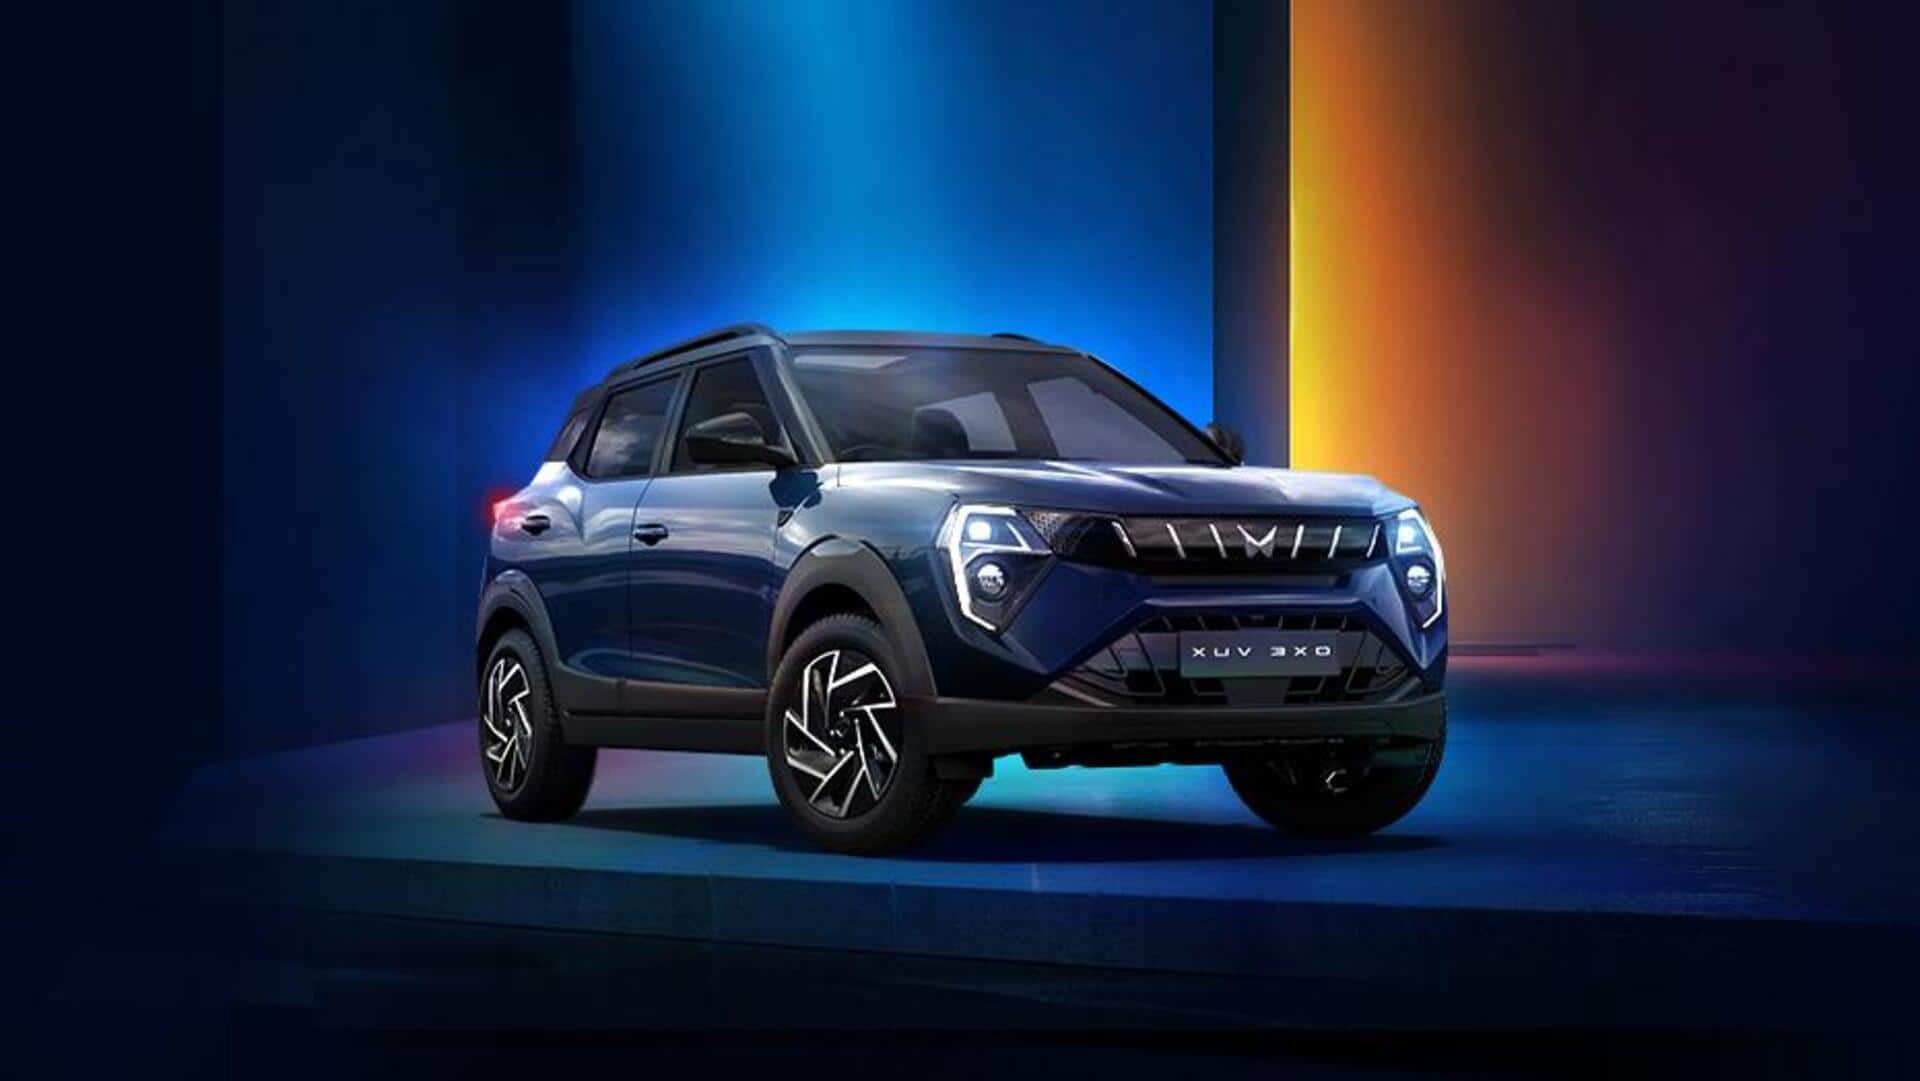 Mahindra XUV 3XO clocks 10,000 sales in first month